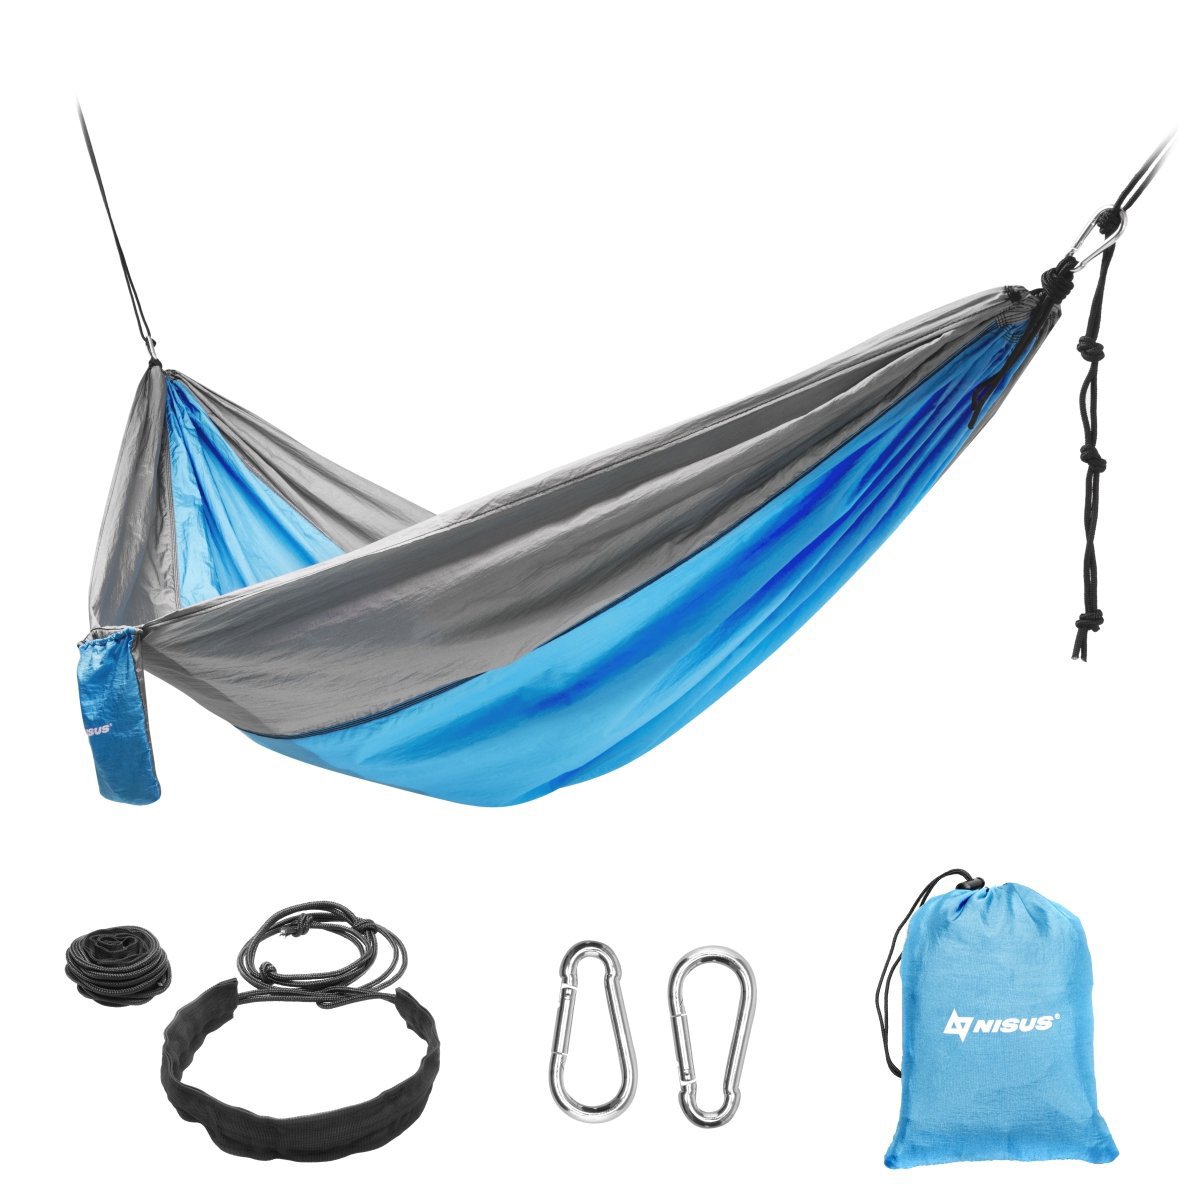 Blue camping hammock with a carry bag and ropes